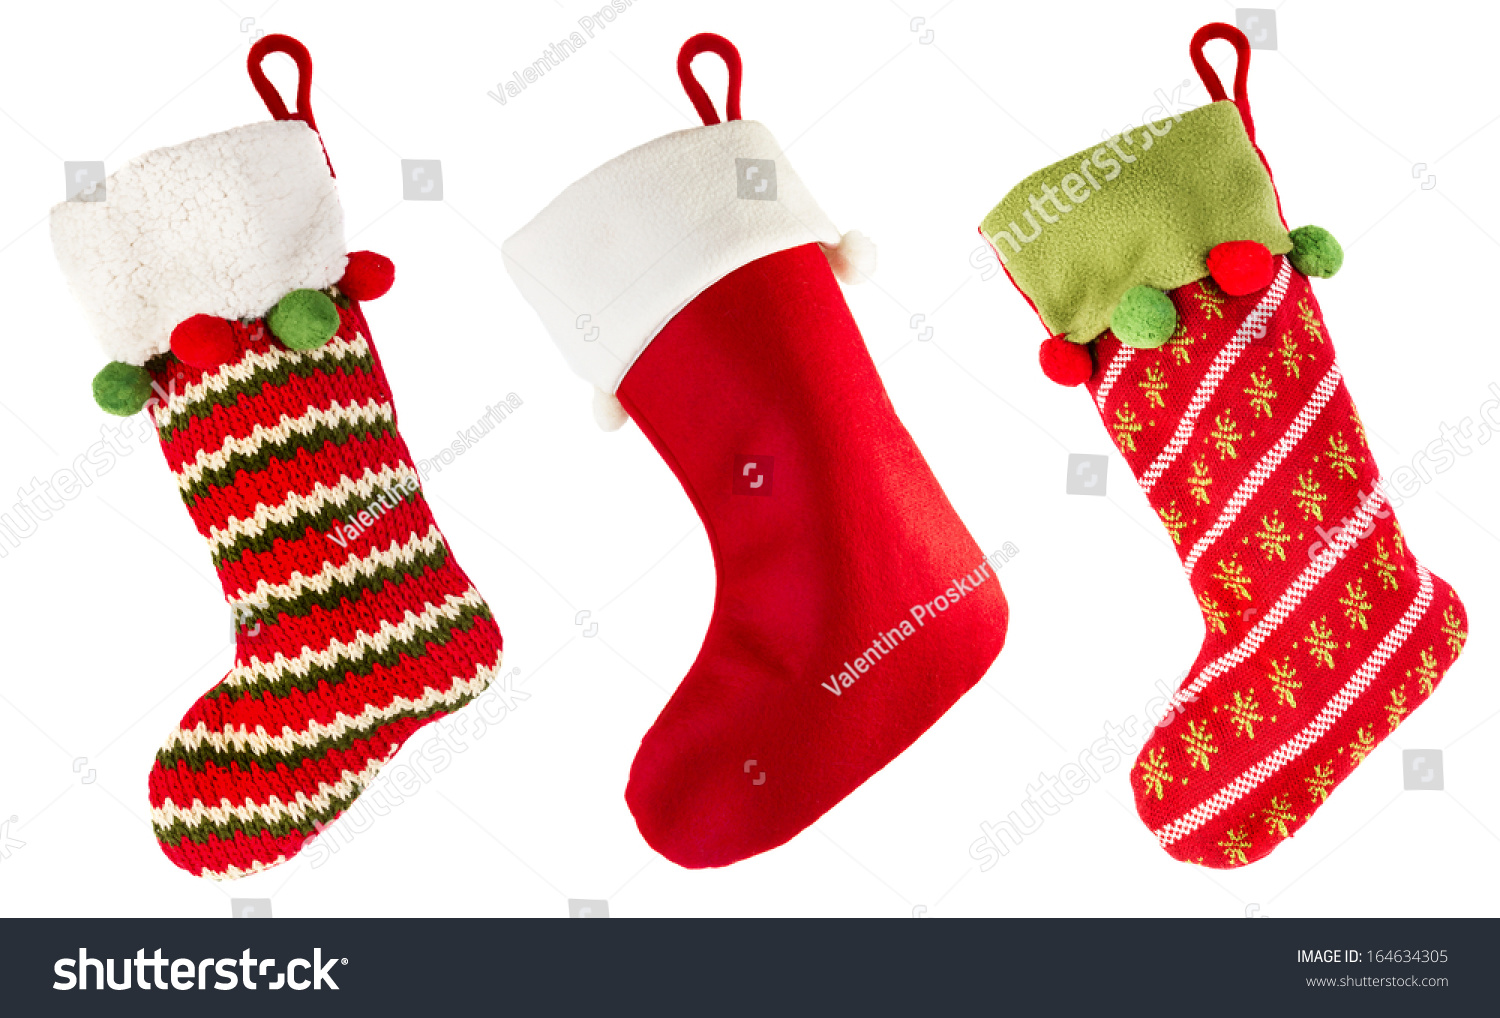 185,571 Stockings Stock Photos, Images & Photography | Shutterstock